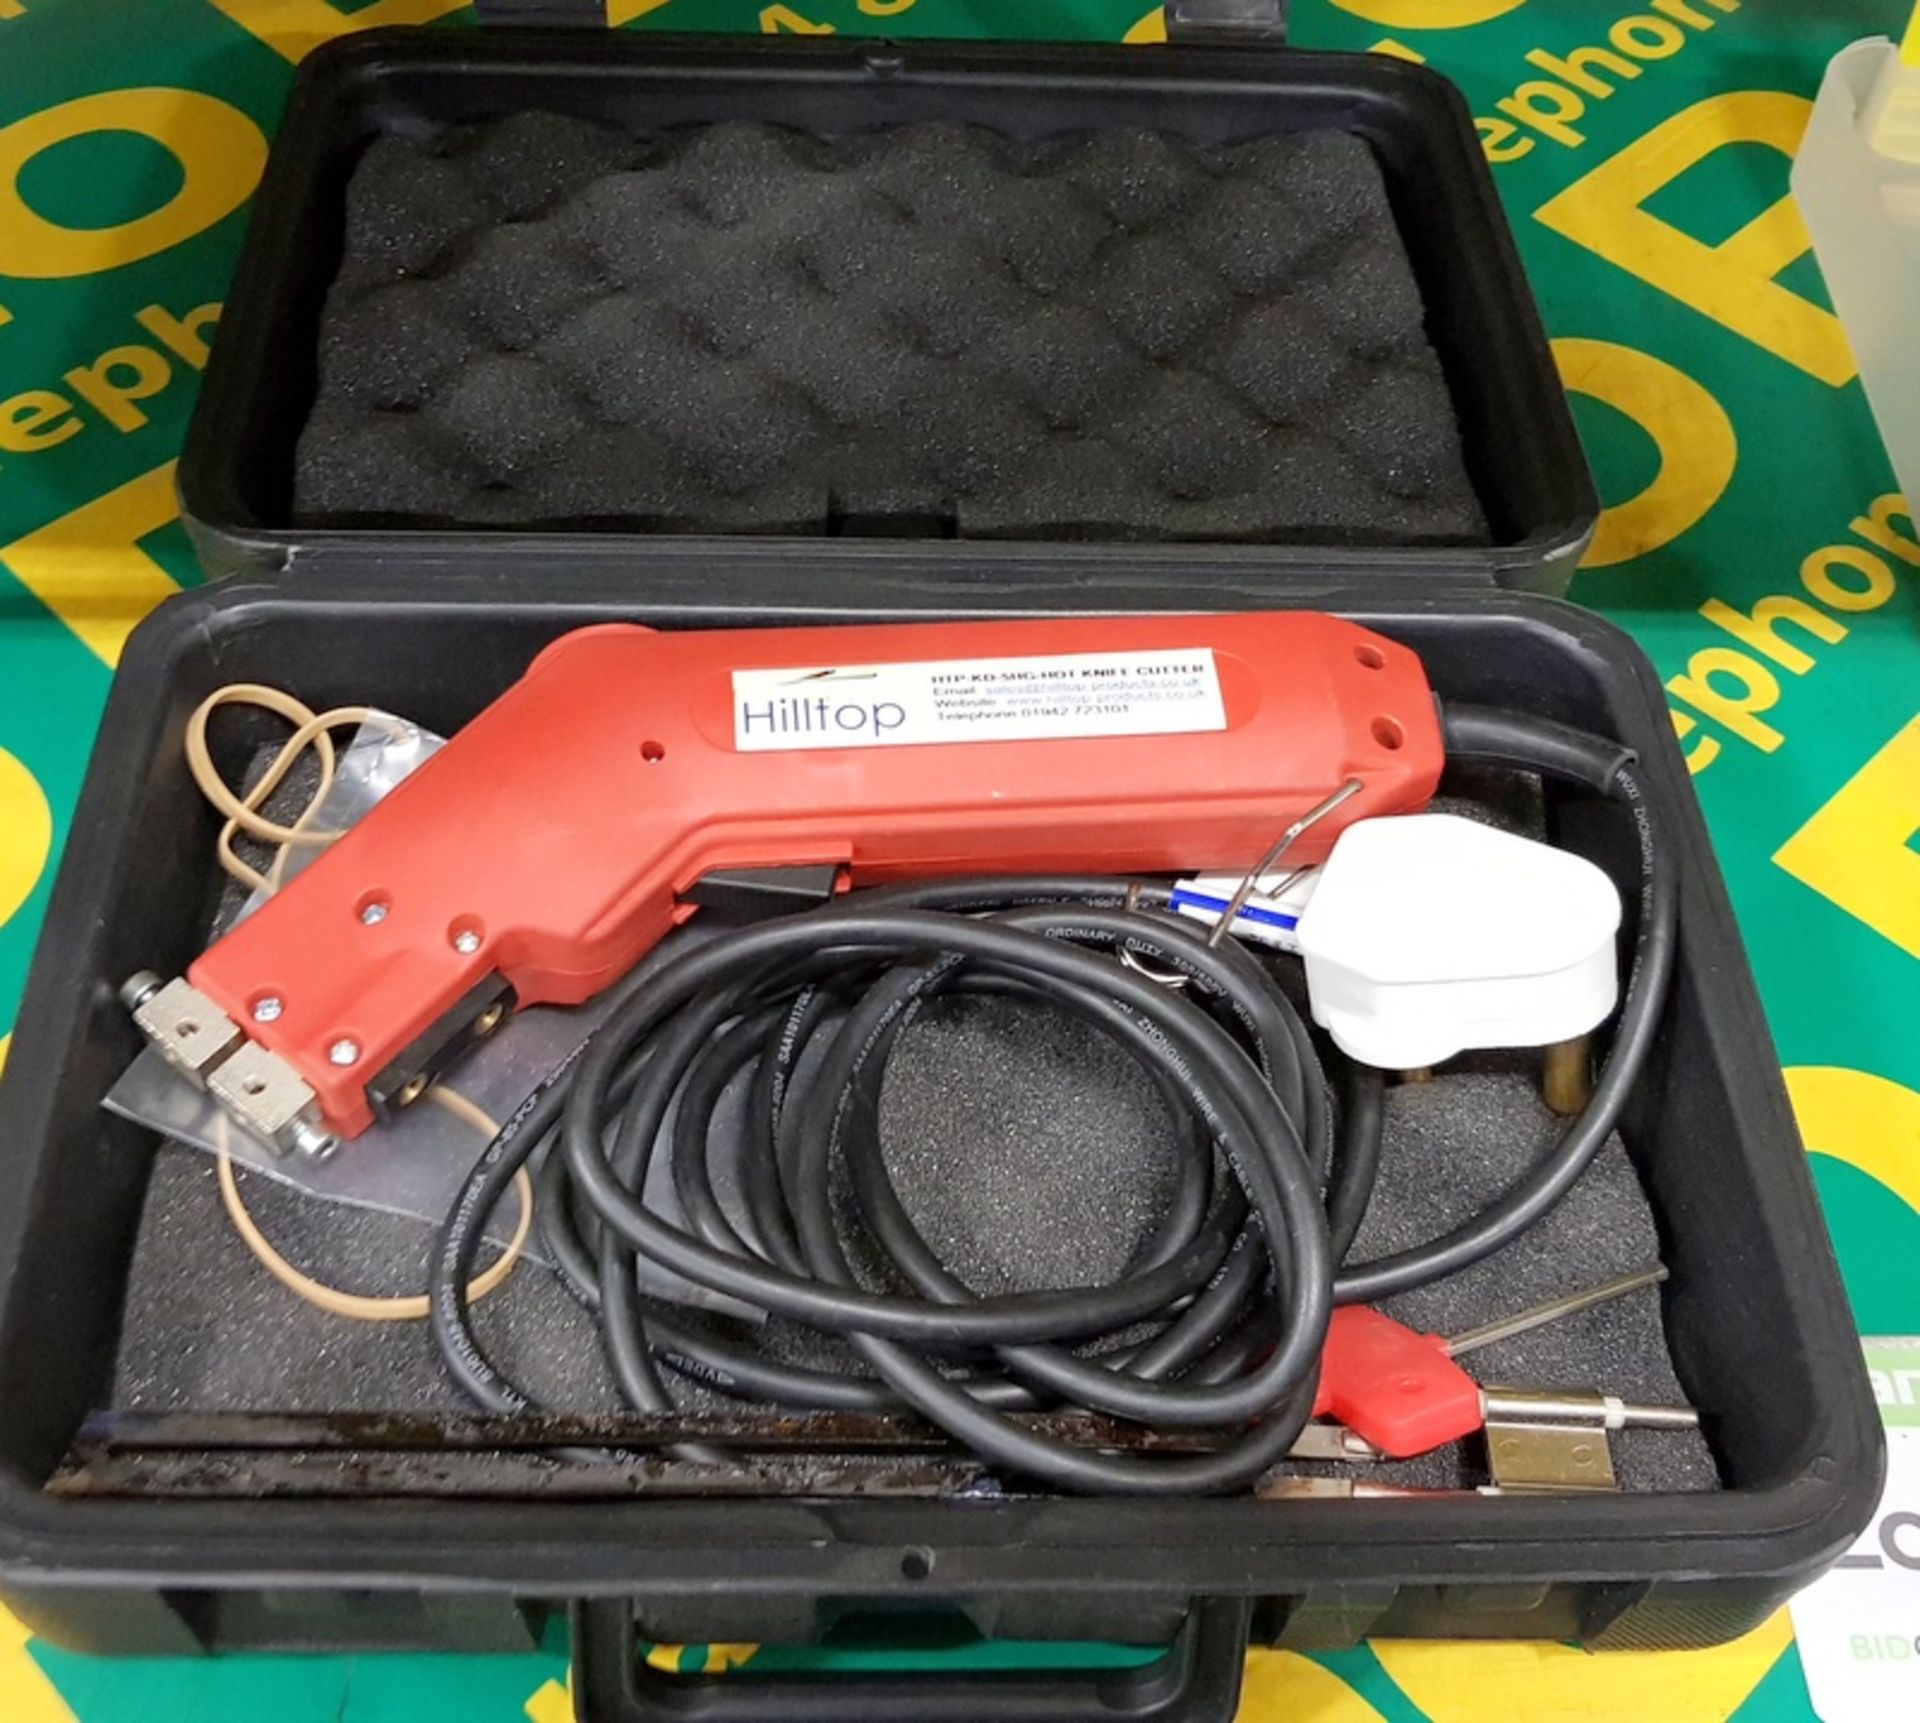 Hilltop Products HTP-KD-5HG Hot Cutter tool in case Record Professional Engraver in case - Image 2 of 5